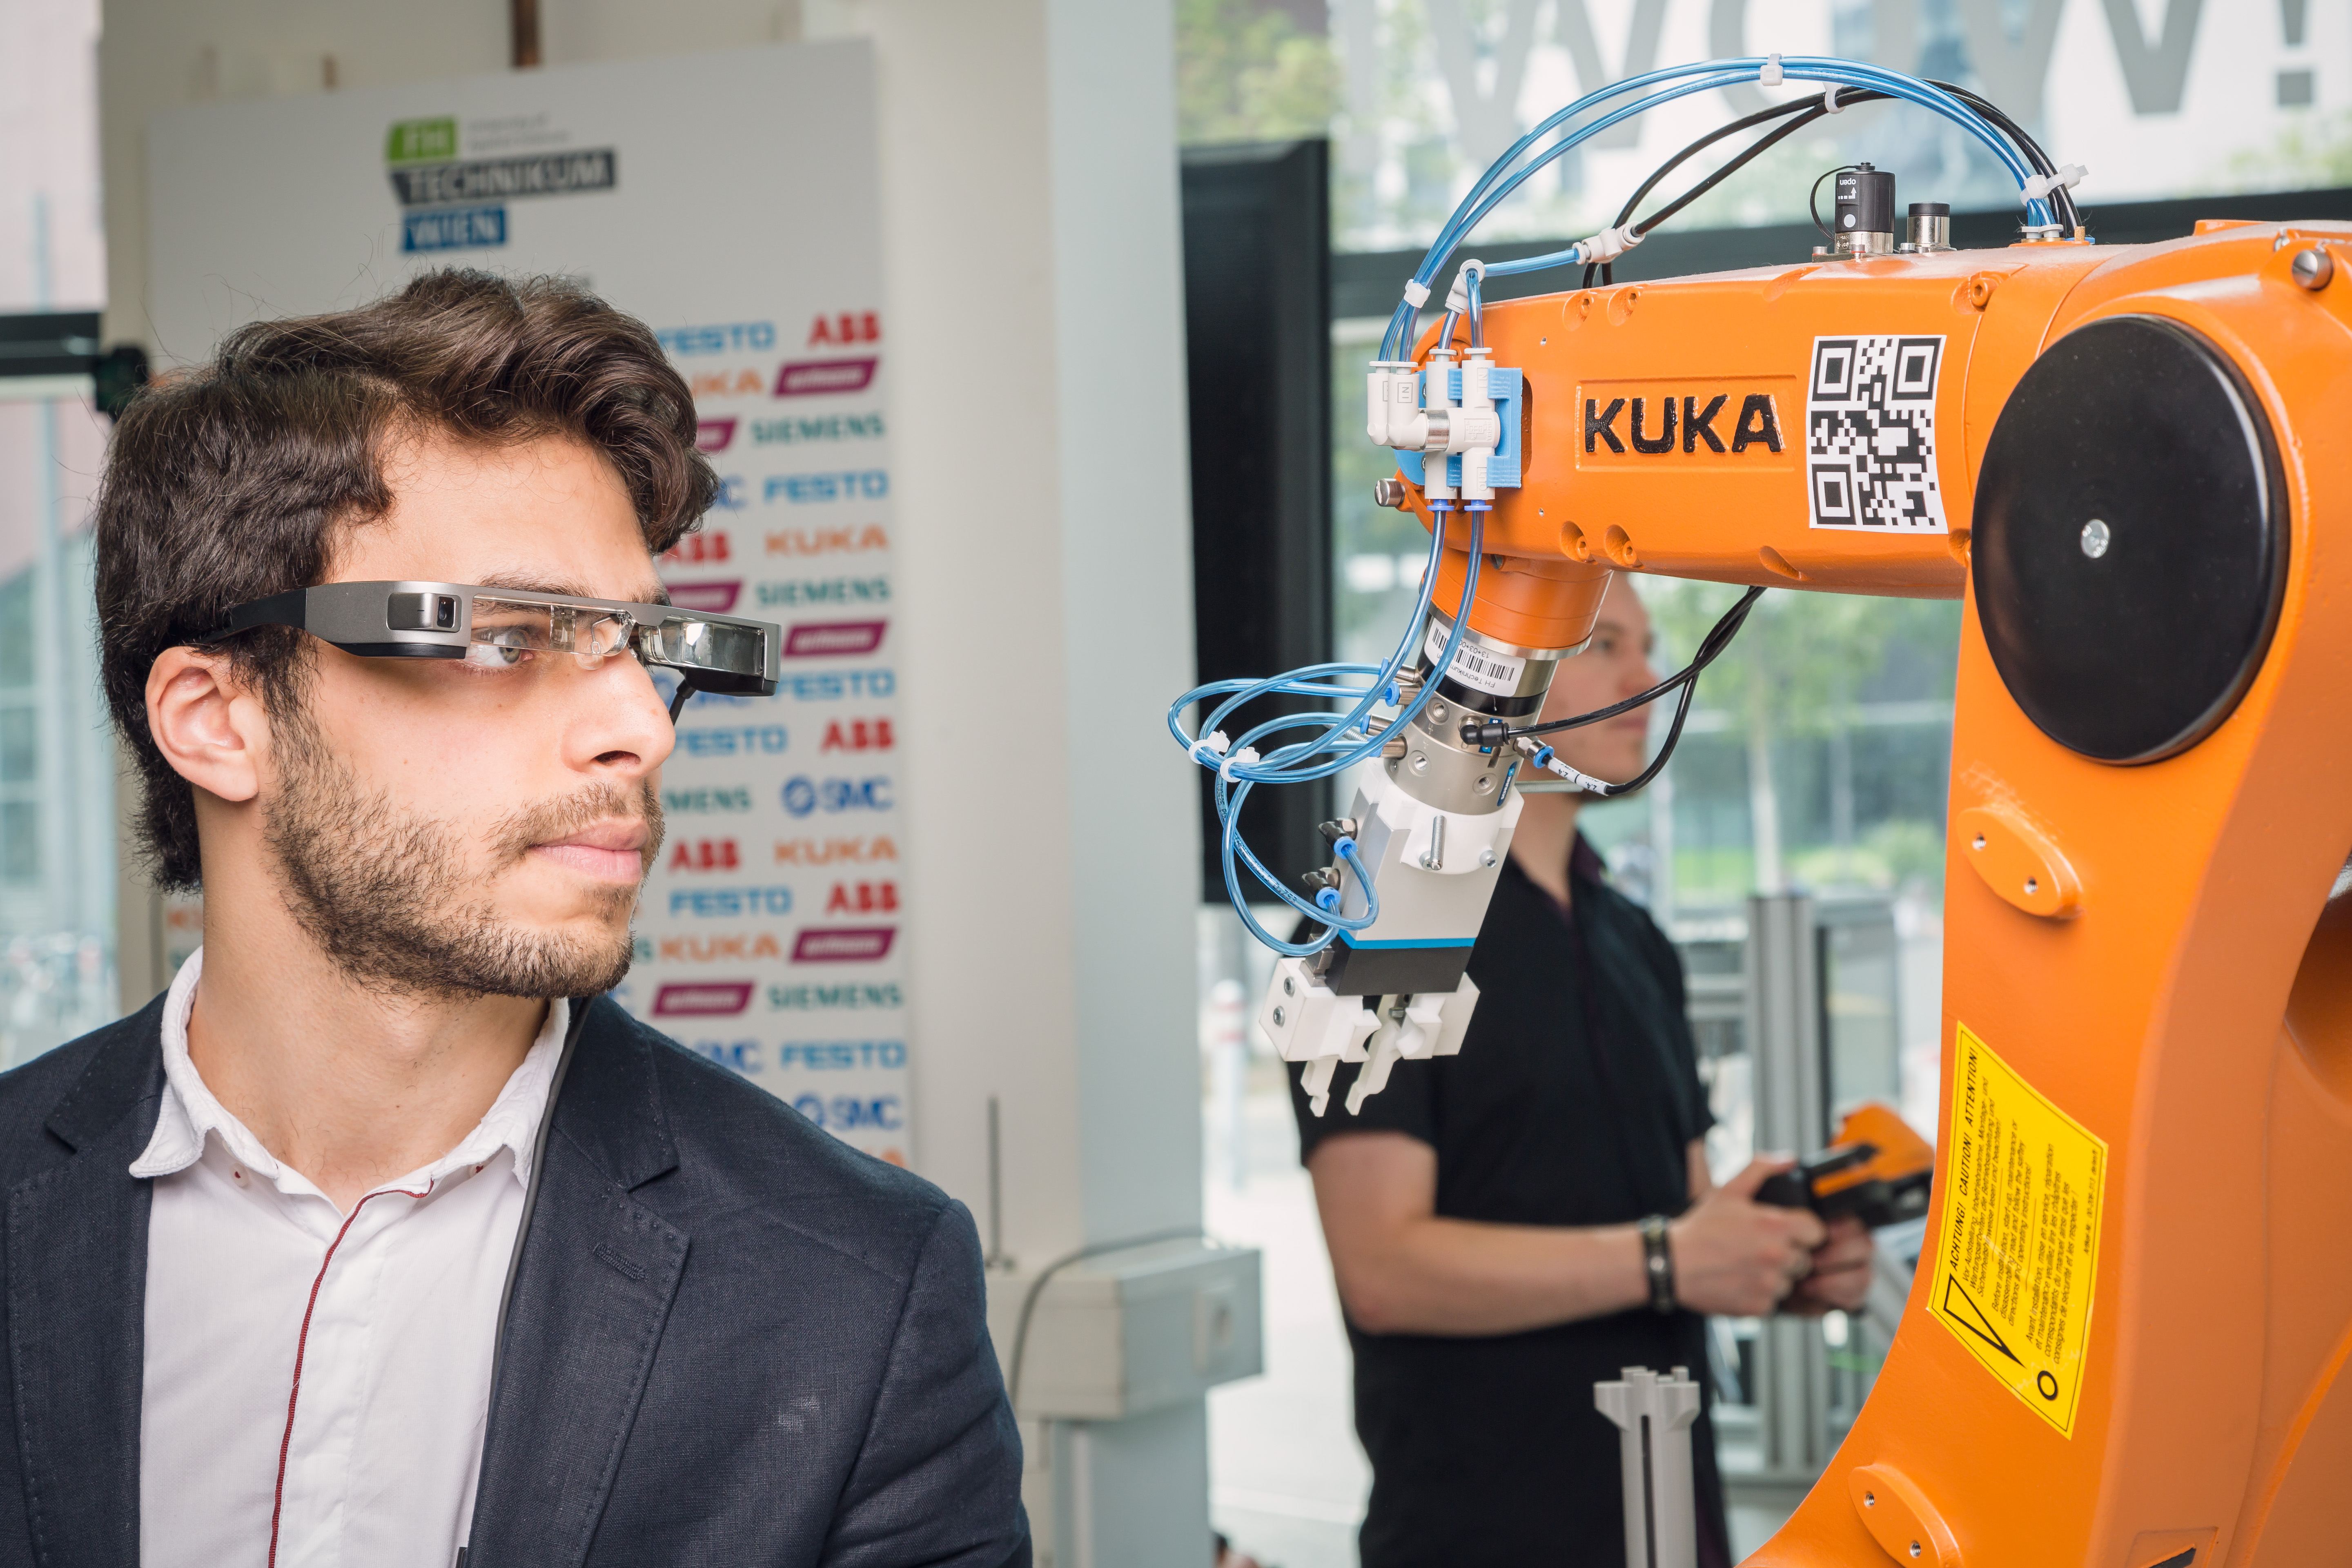 A student with smart goggles interacting with a manufacturing robot.